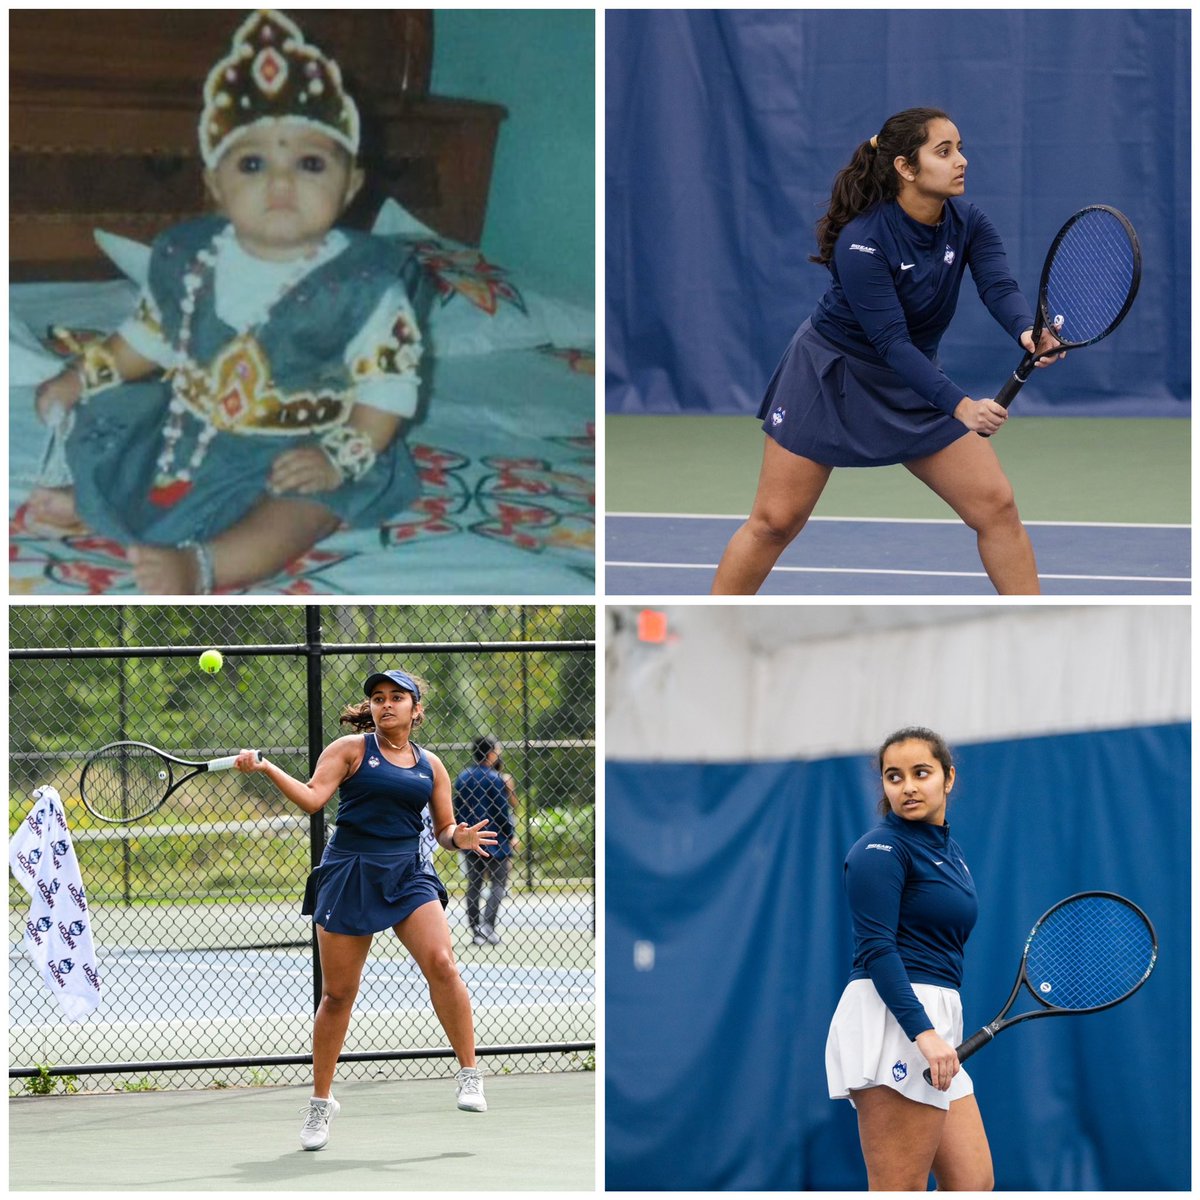 HAPPY SENIOR DAY!!!🎾🤩 Thank you so much to these two awesome seniors for everything they have done for this program. All of your contributions are greatly appreciated! We look forward to seeing what’s in store for you in your future! Good luck on your future endeavors!